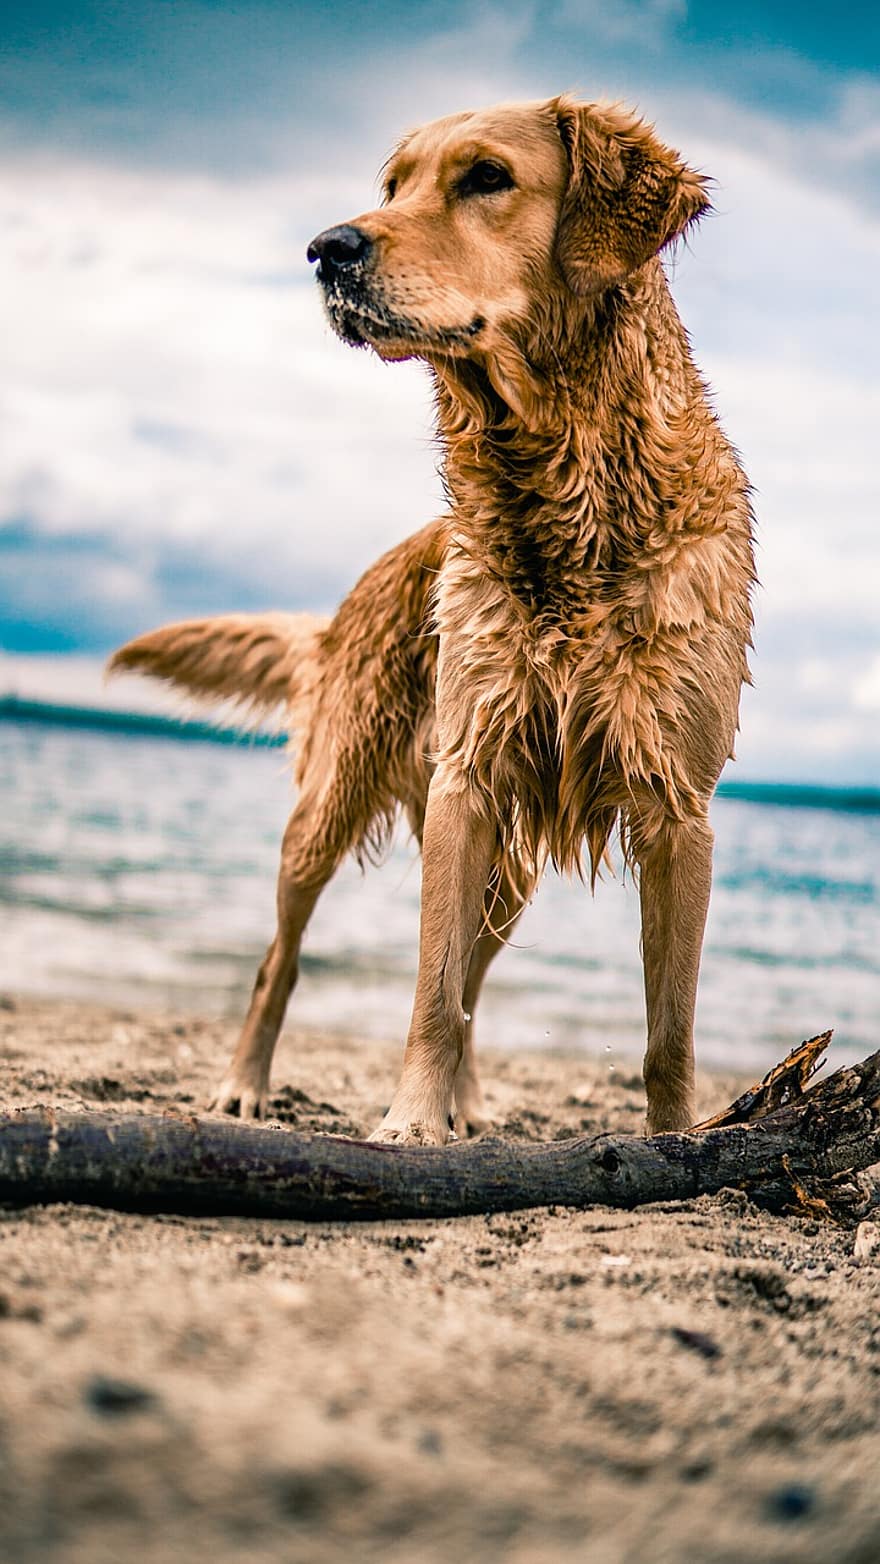 Golden Retriever, Animal, Dog, Cute, Nature, Pet, Beach, Canine, Happy, Outdoor, Young